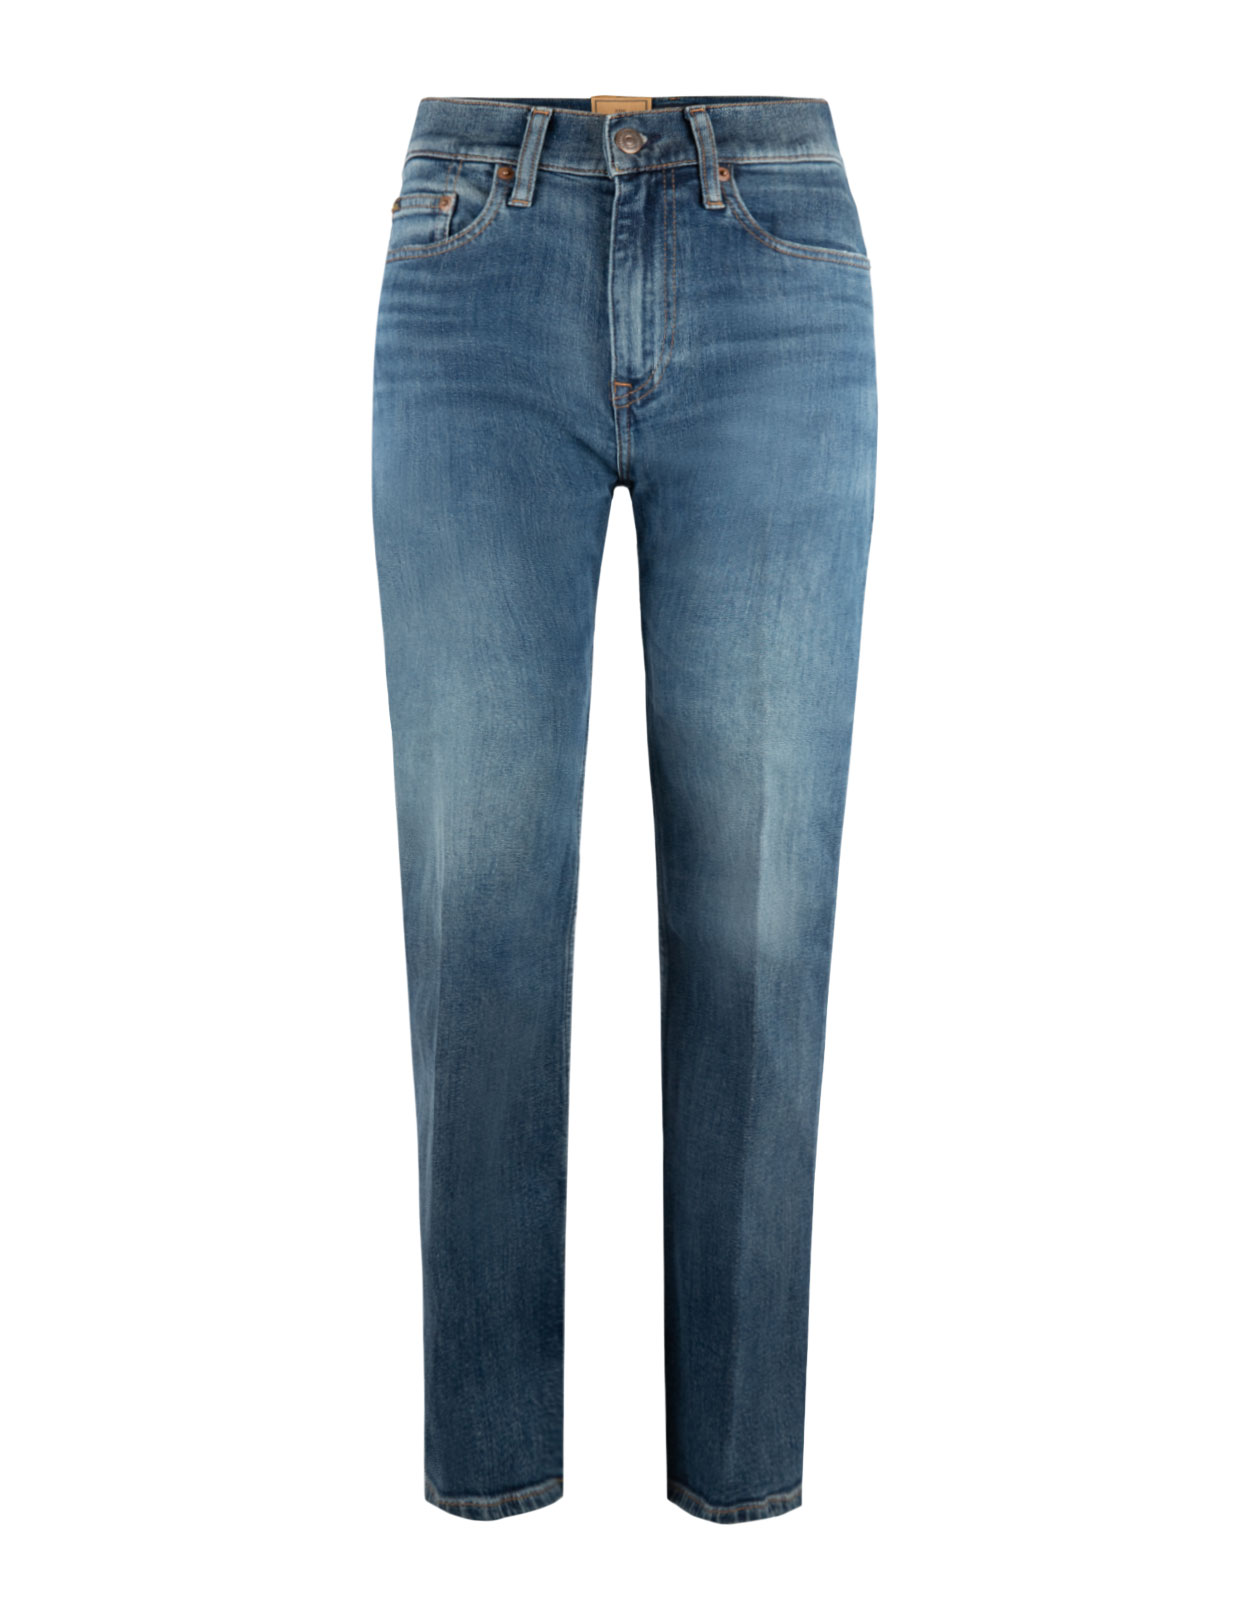 Straight Full Lenght Jeans Ruano Wash